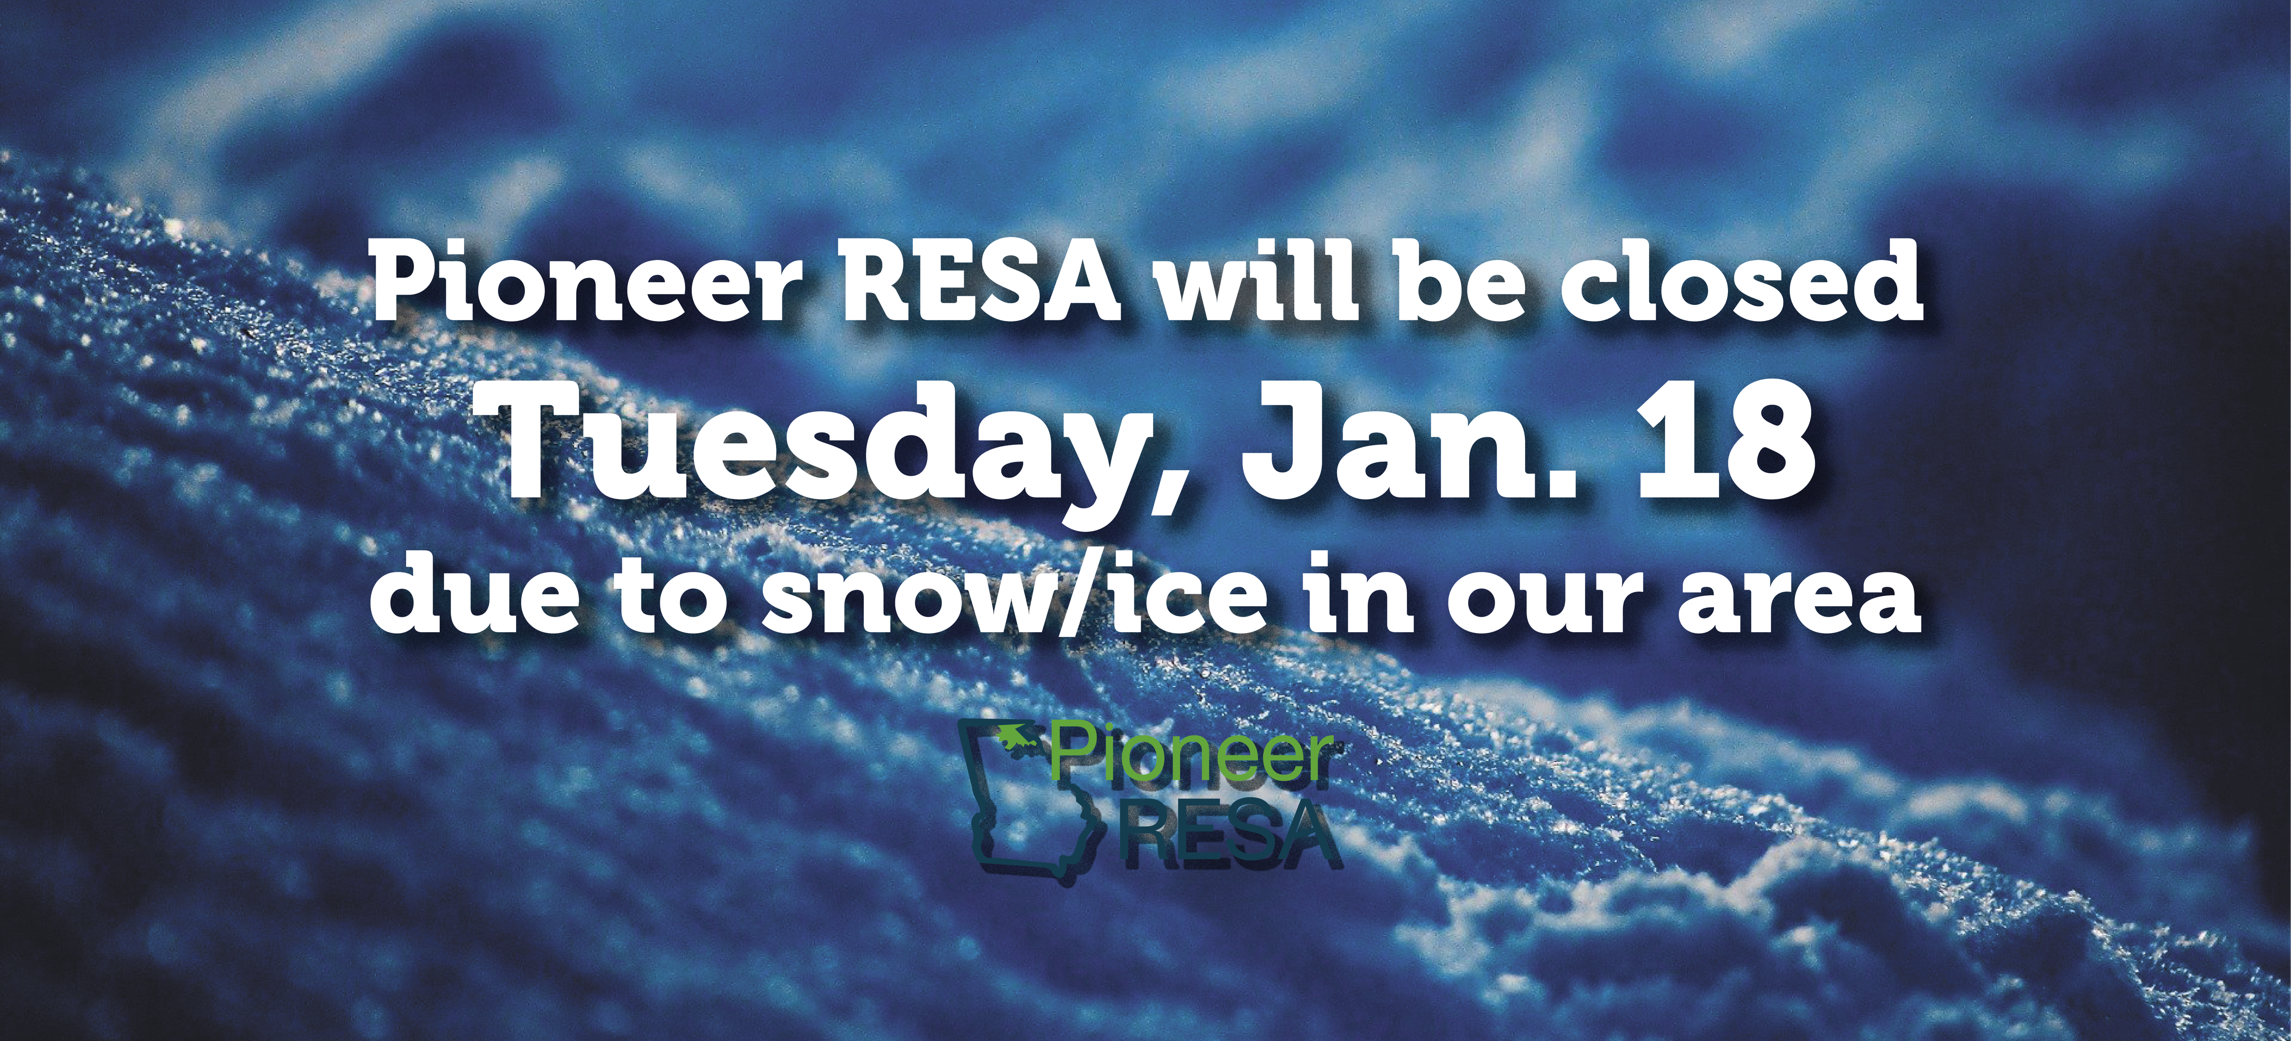 PIONEER RESA CLOSED JANUARY 18 FOR SNOW/ICE